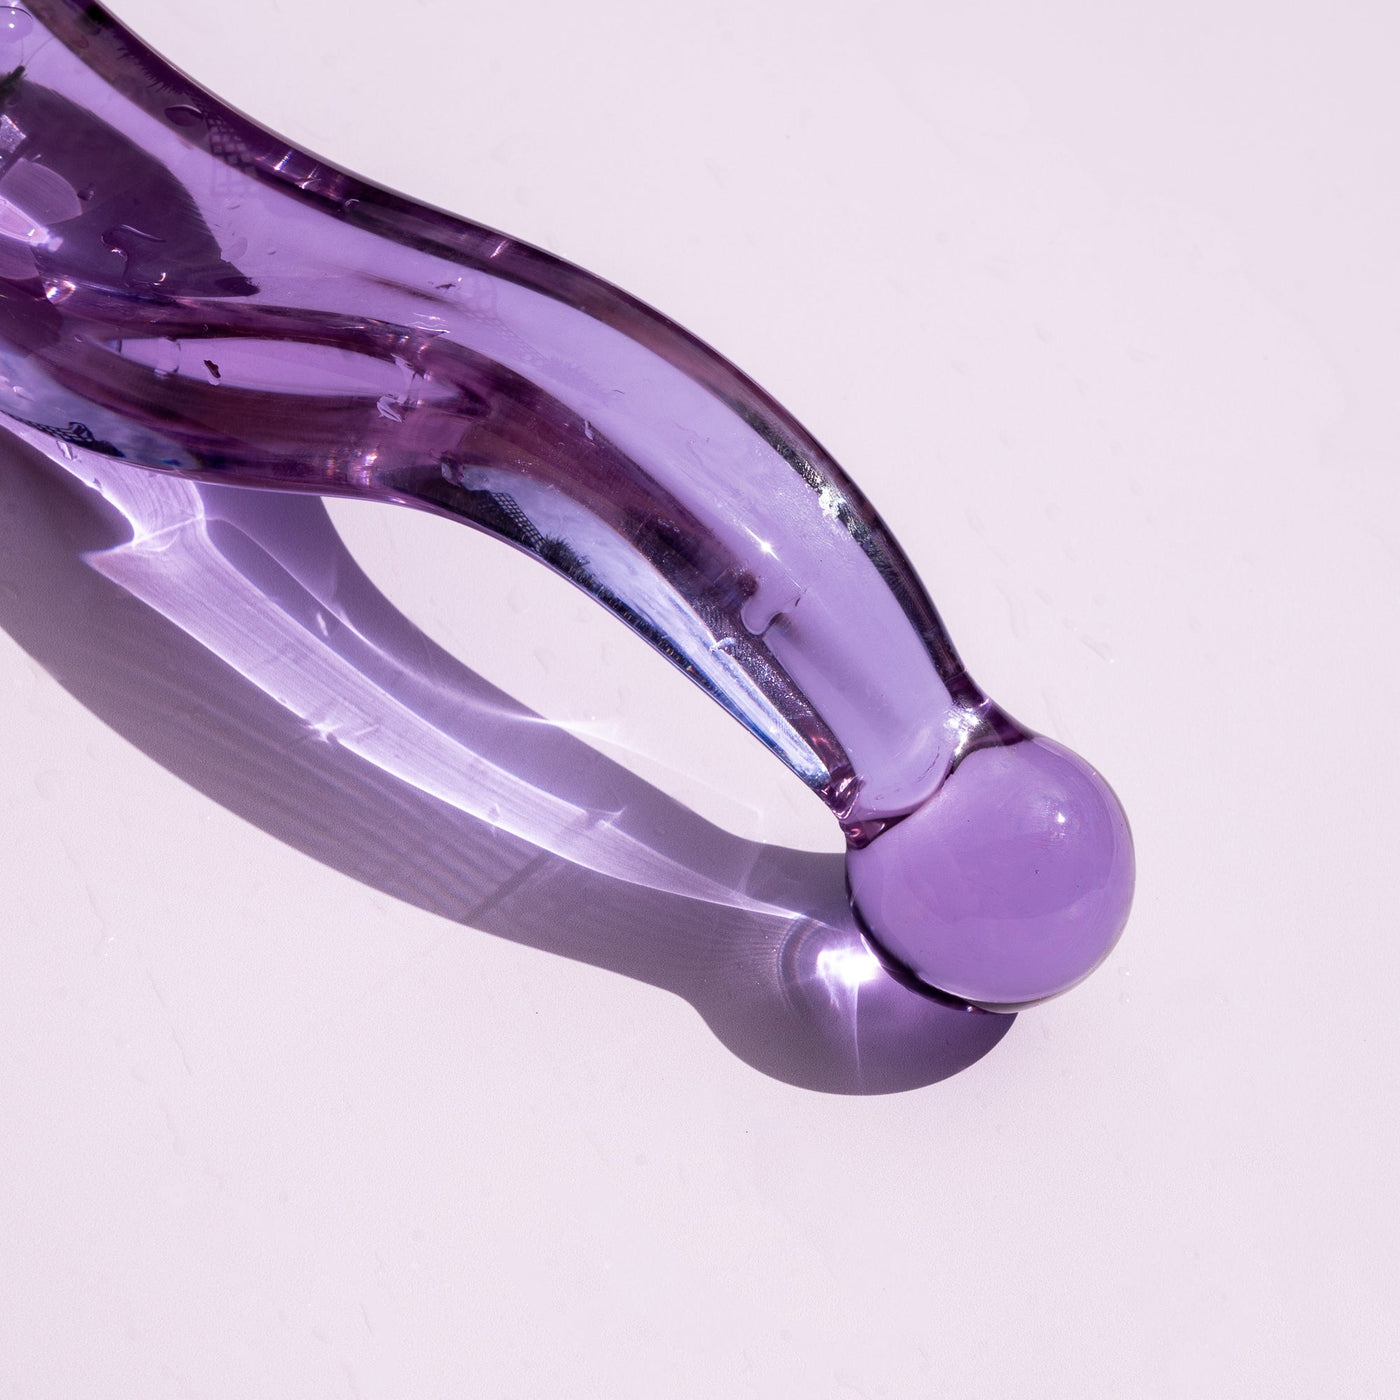 Pussy paddle thick curved pleasure wand in lilac. Pictured on pale purple background.